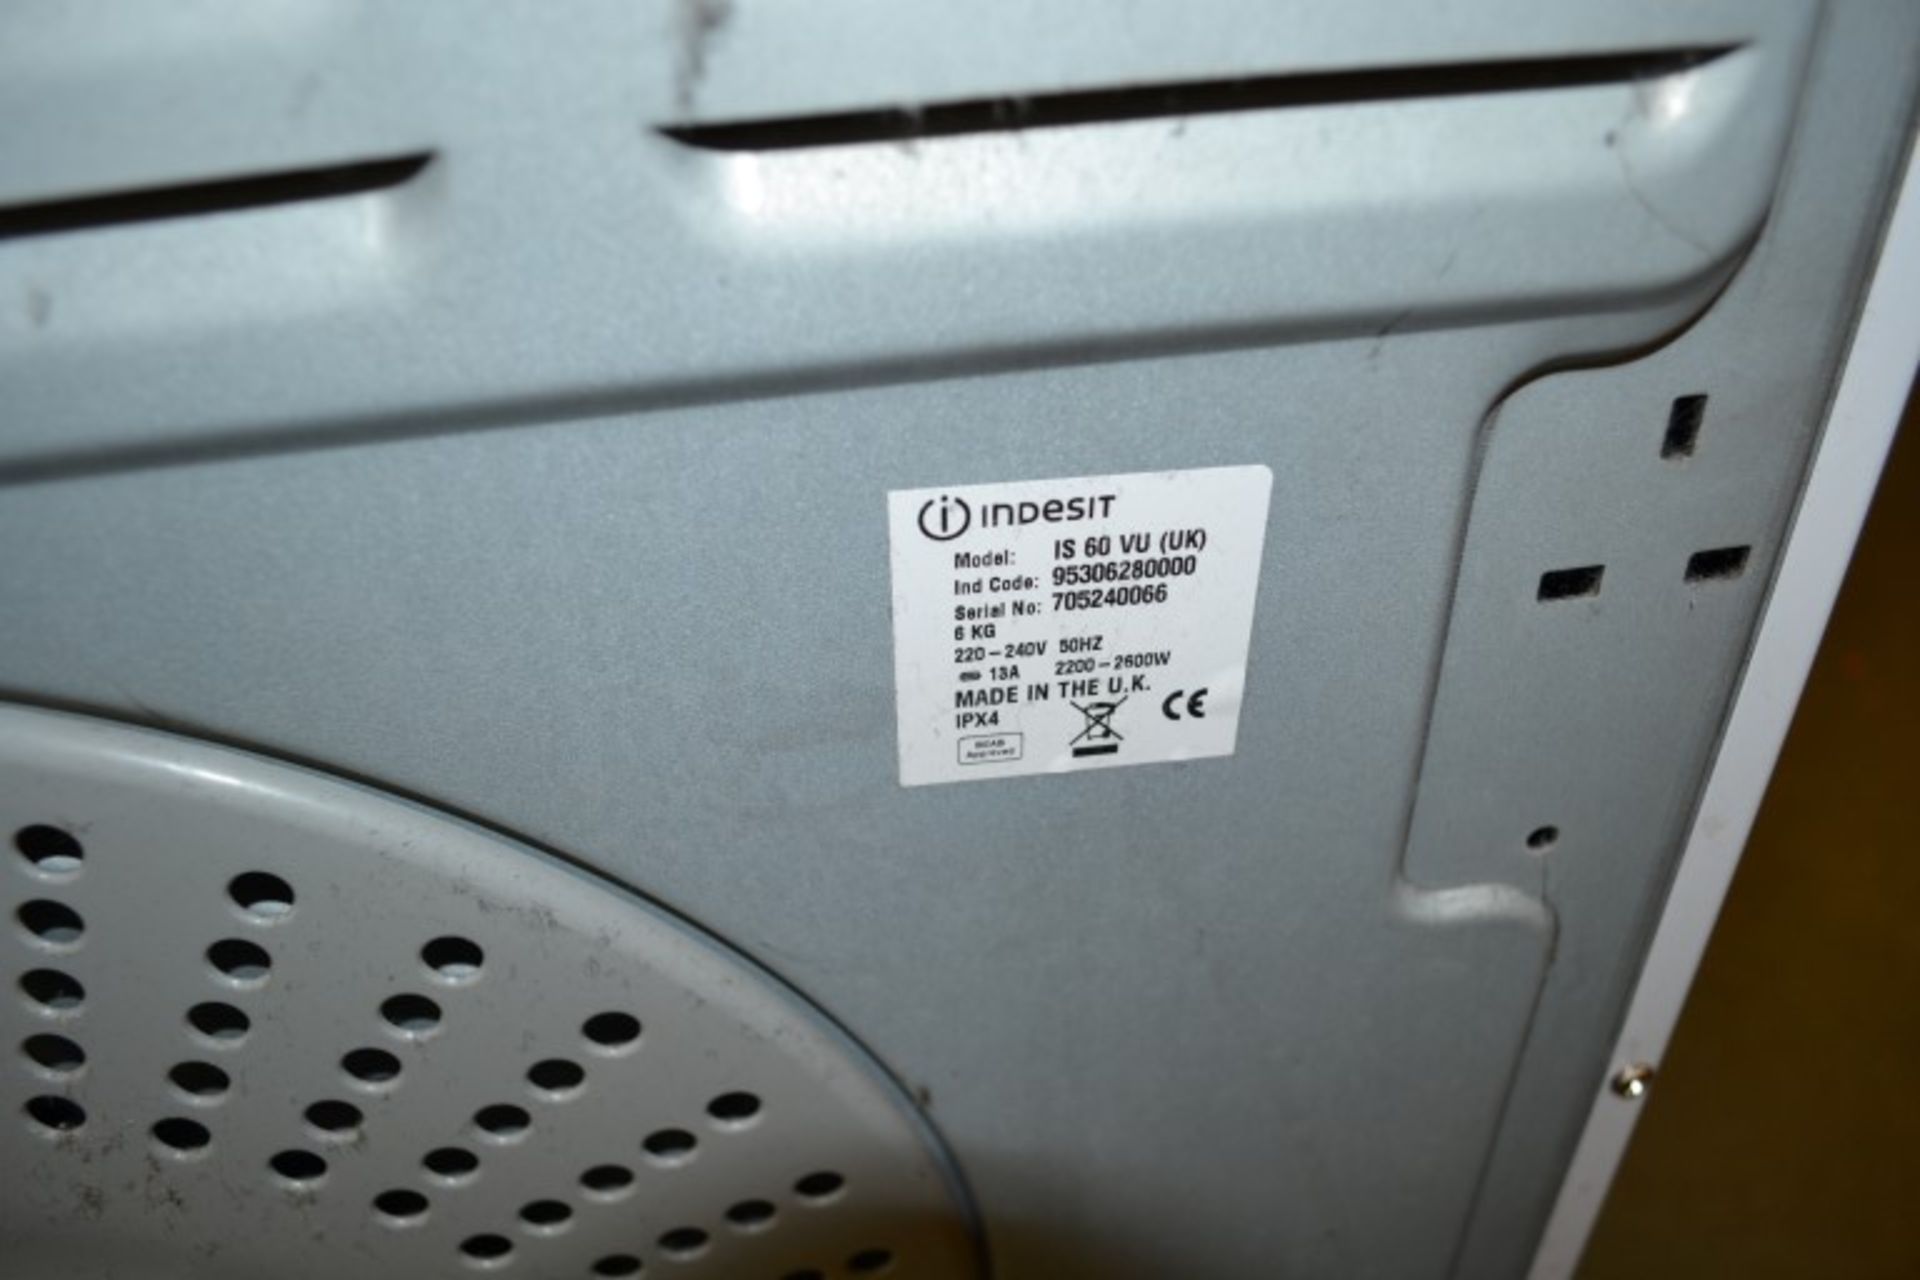 1 x Indesit Tumble Dryer (ModeL: IS60 VU) - From A Clean Manor House Environment In Good Working - Image 2 of 6